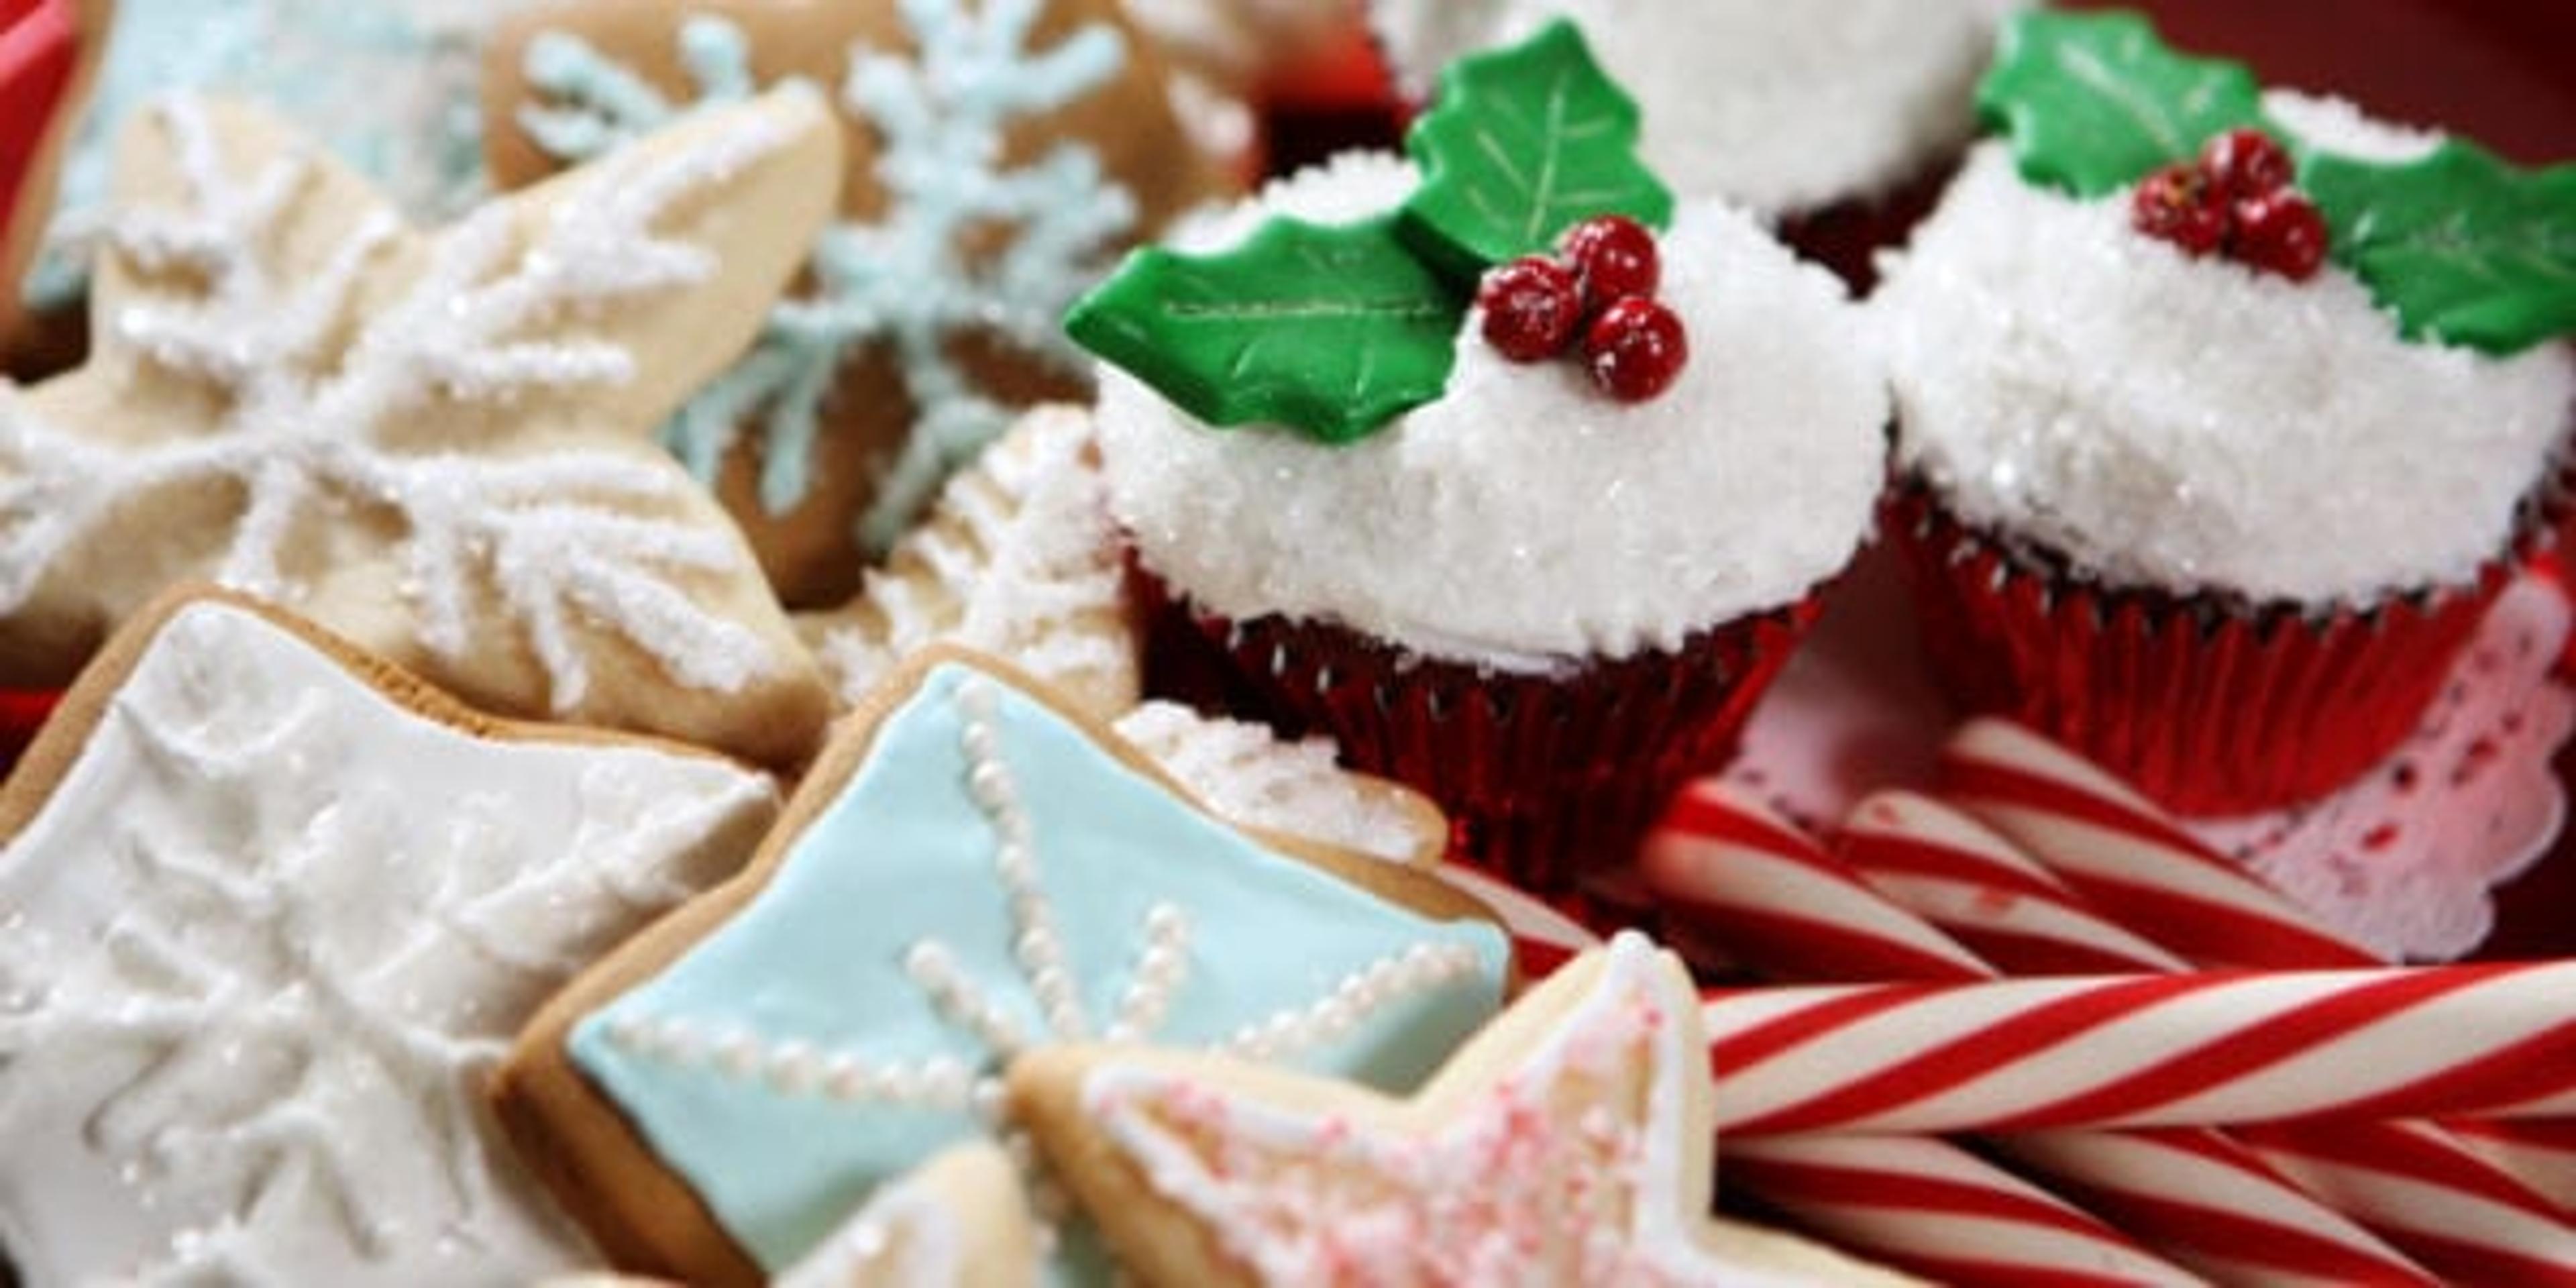 A plate of Christmas cookies, cupcakes and candy canes